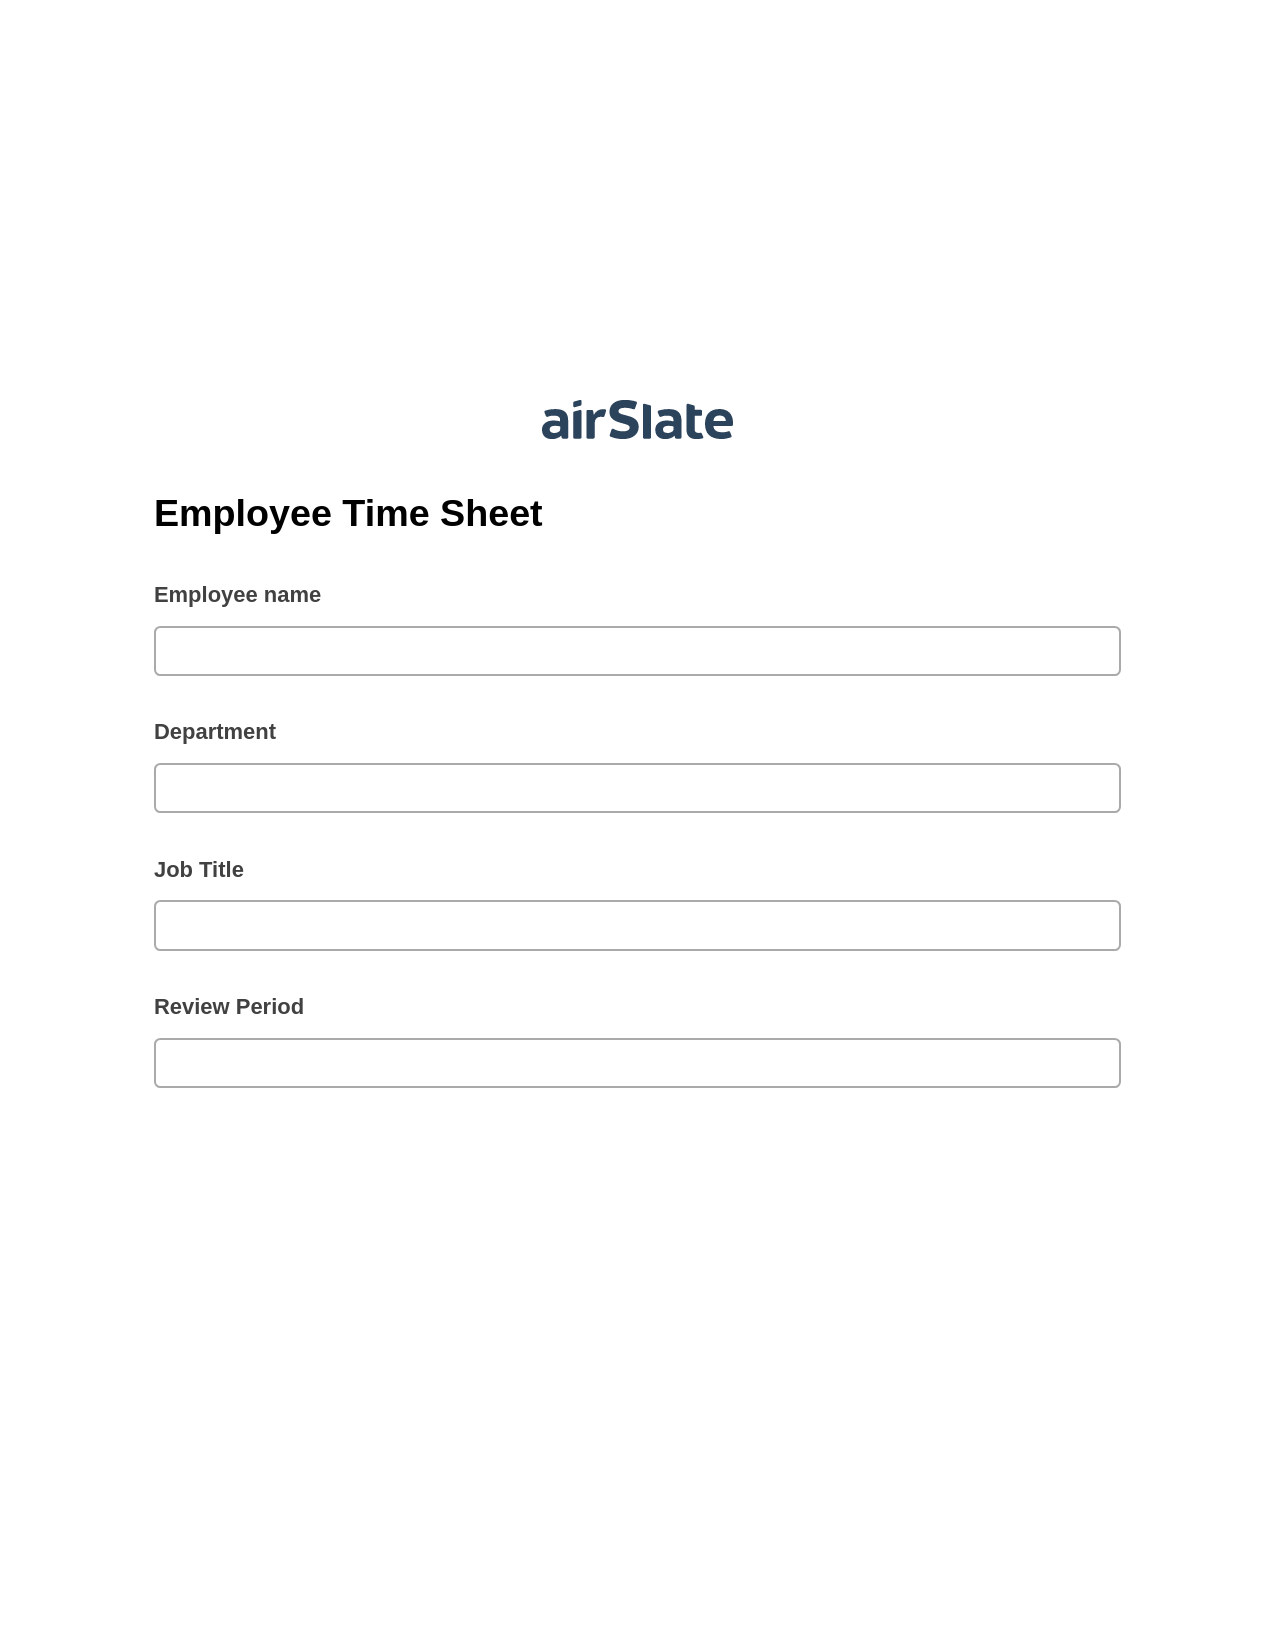 Multirole Employee Time Sheet Pre-fill Dropdowns from Excel Bot, Update MS Dynamics 365 Record Bot, Post-finish Document Bot